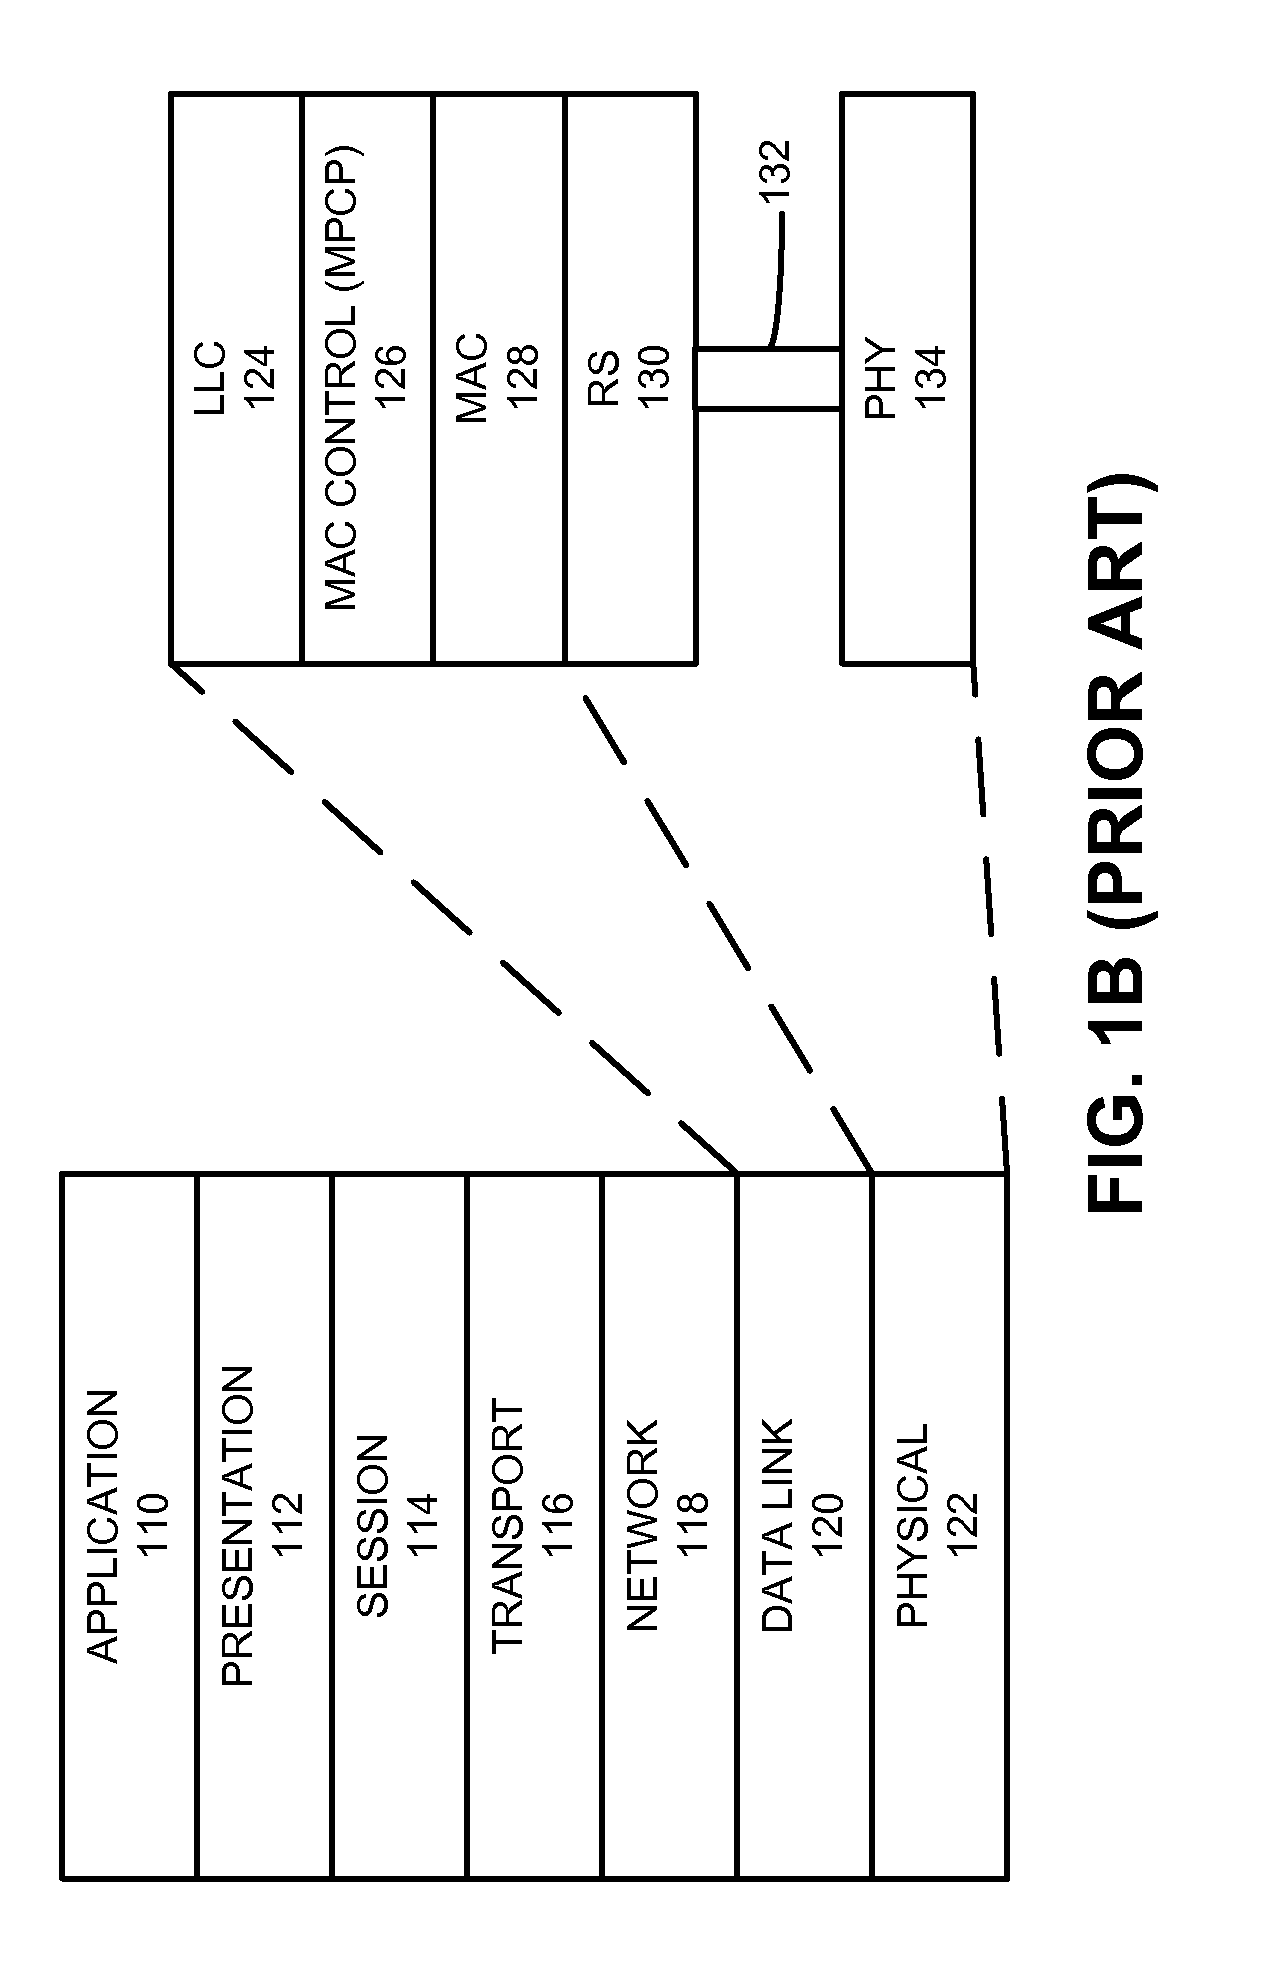 Methods and apparatus for extending mac control messages in epon